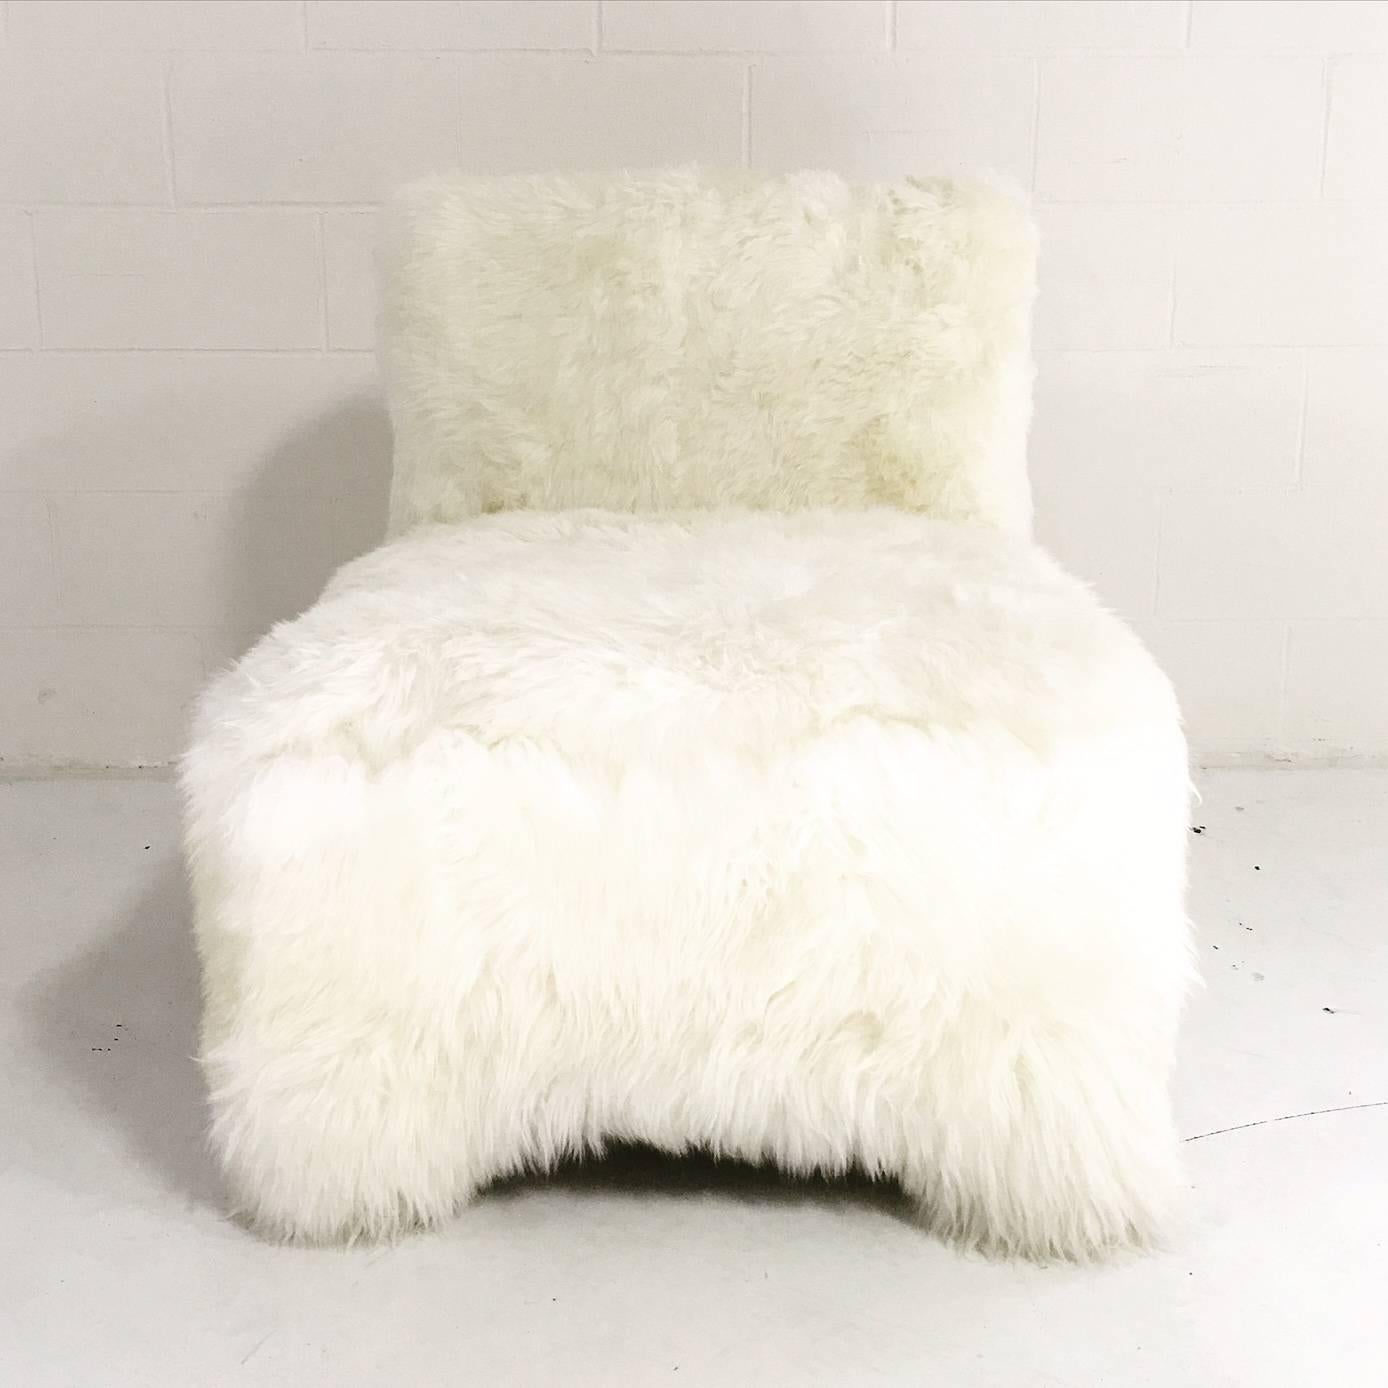 Collected by us and masterfully reupholstered in our luxurious, cozy New Zealand sheepskin. We can't help but picture this chair in a Bohemian nursery room or next to a roaring fire in a sweet ski chalet. The look is so versatile!

 

Length: 31